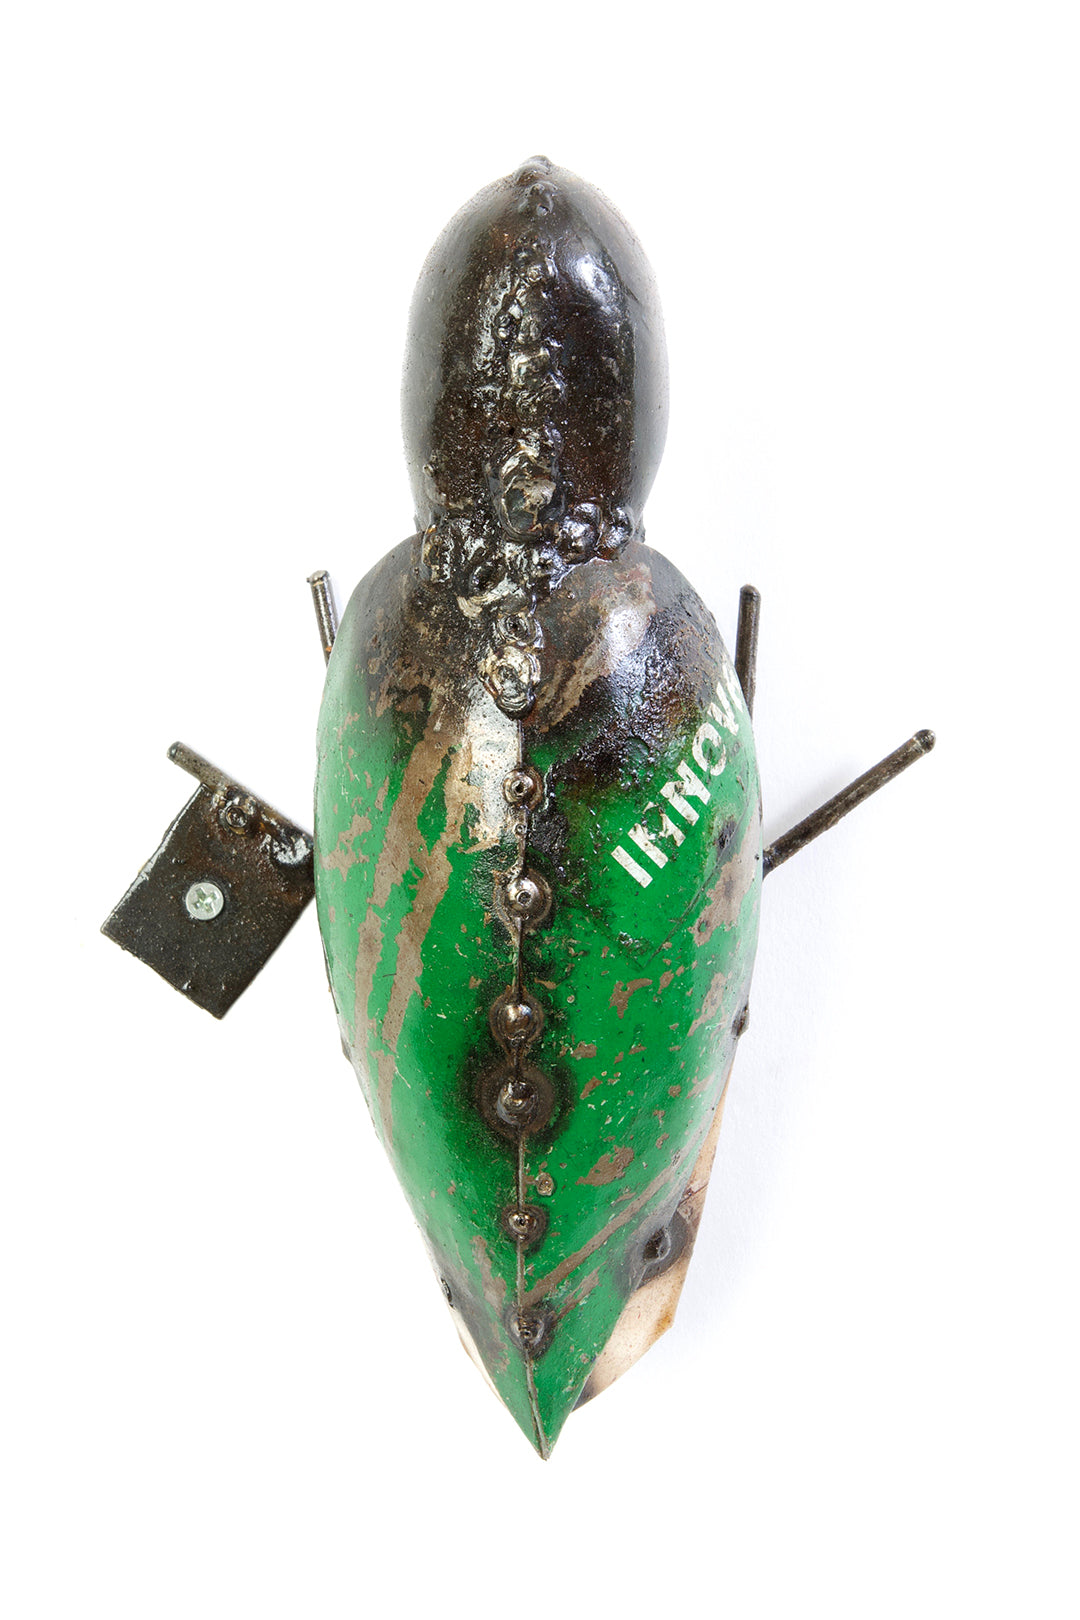 Hanging Woodpecker Recycled Oil Drum Sculpture Default Title